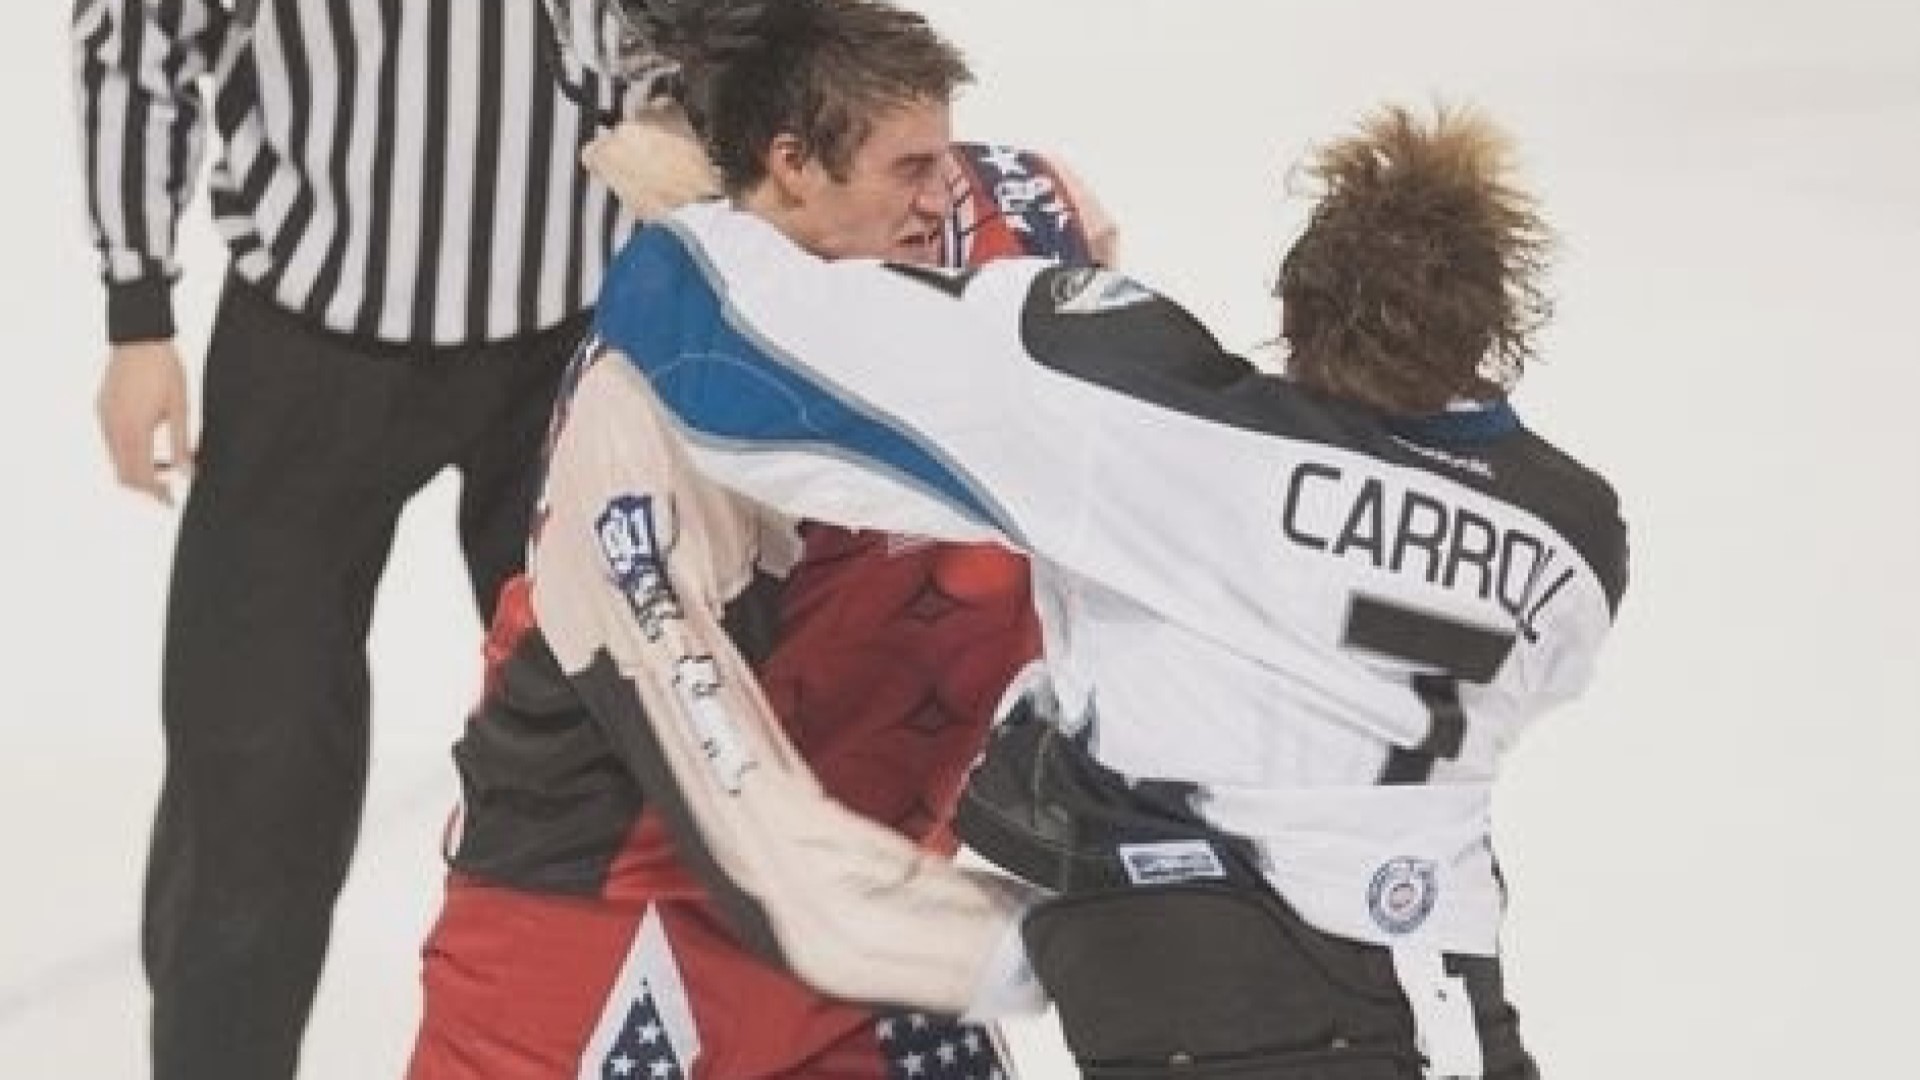 A new study from Columbia University found that "fighters" in hockey are dying younger than teammates and players that don't fight on the ice as often.